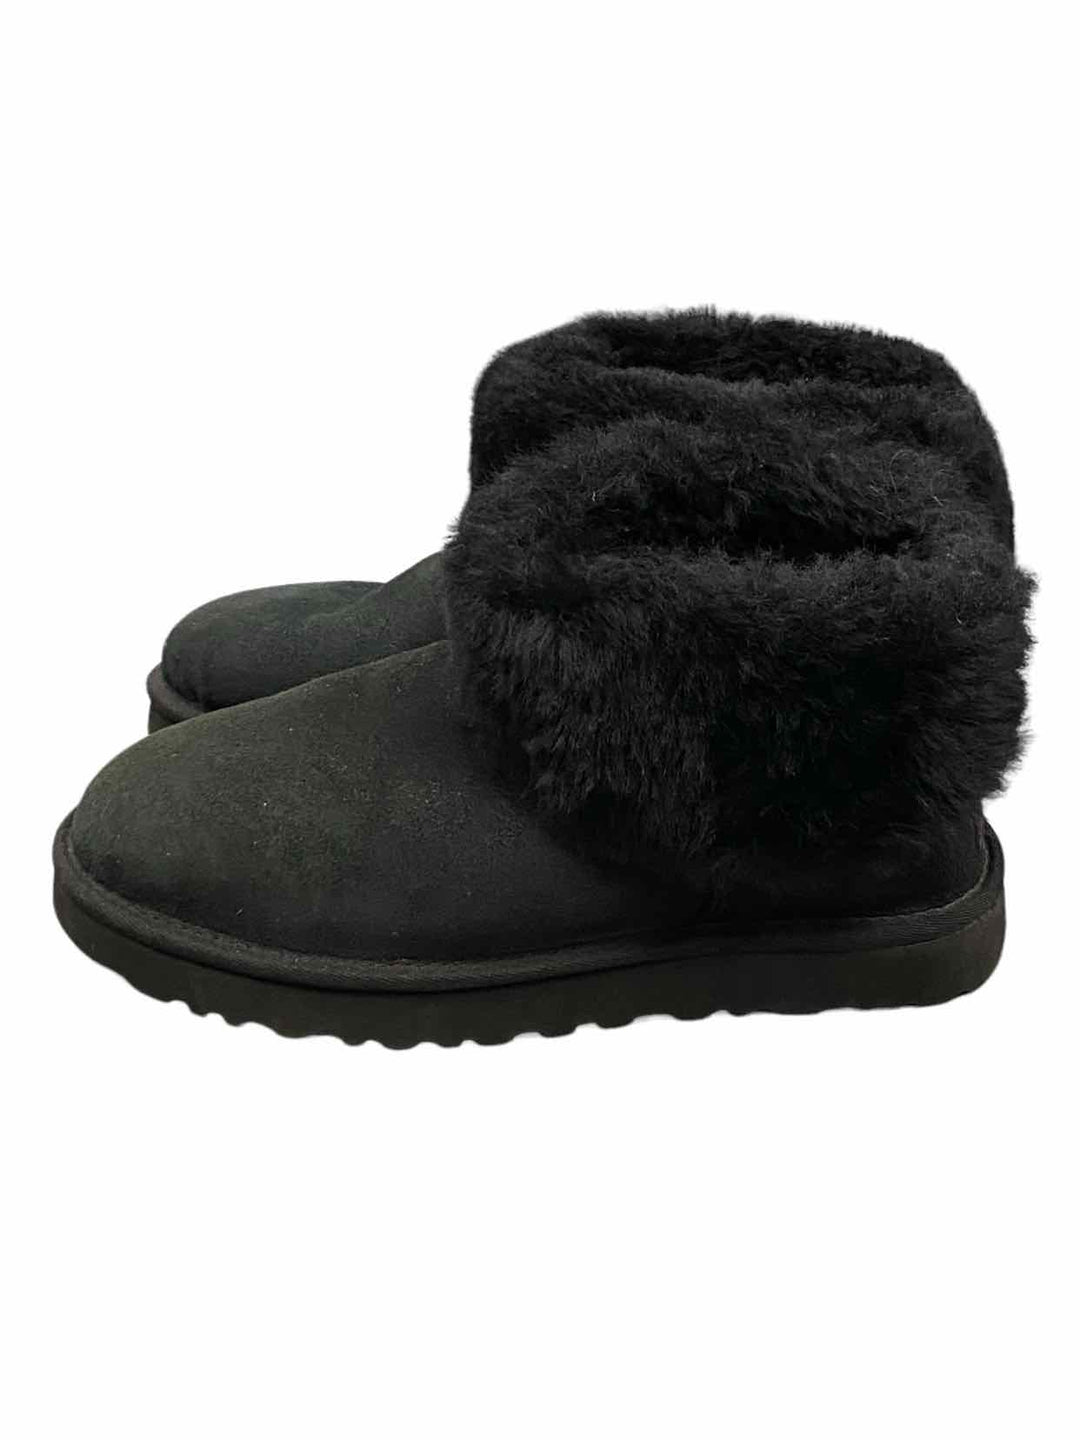 UGG Shoe Size 7 Black Boots(Ankle)